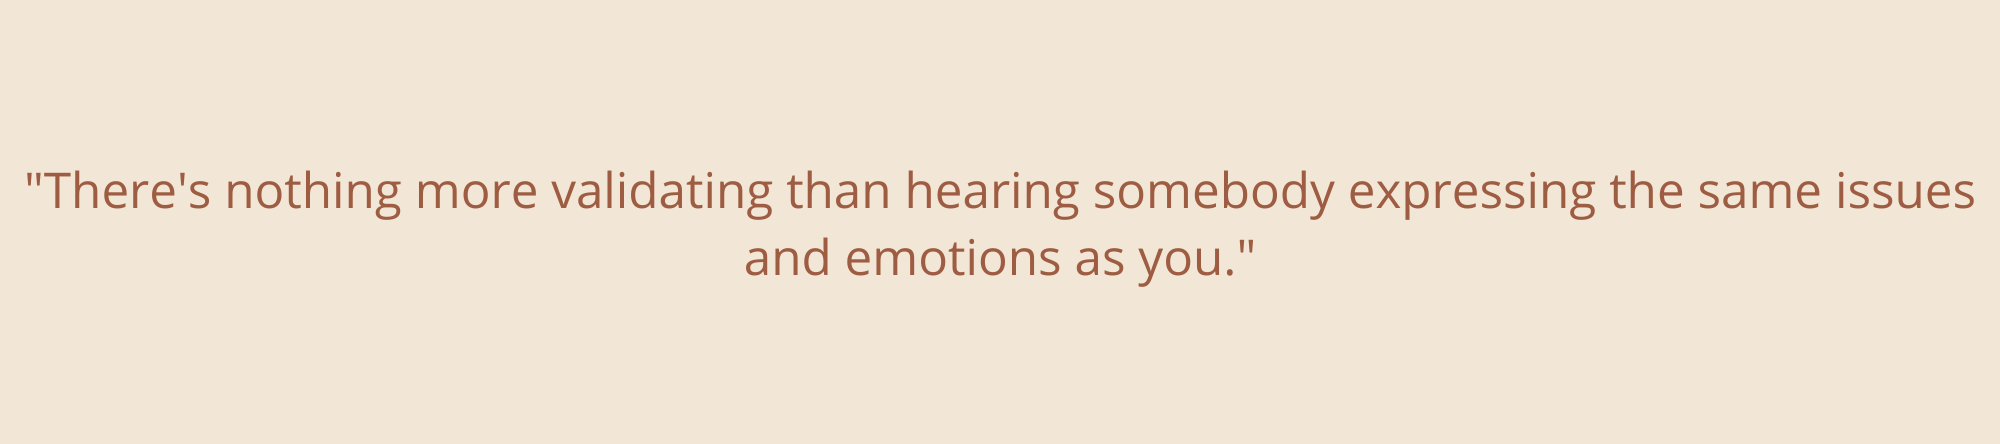 “There is nothing more validating than hearing somebody expressing the same issues and emotions as you. It may have been the most calming part of my day.”-21.png